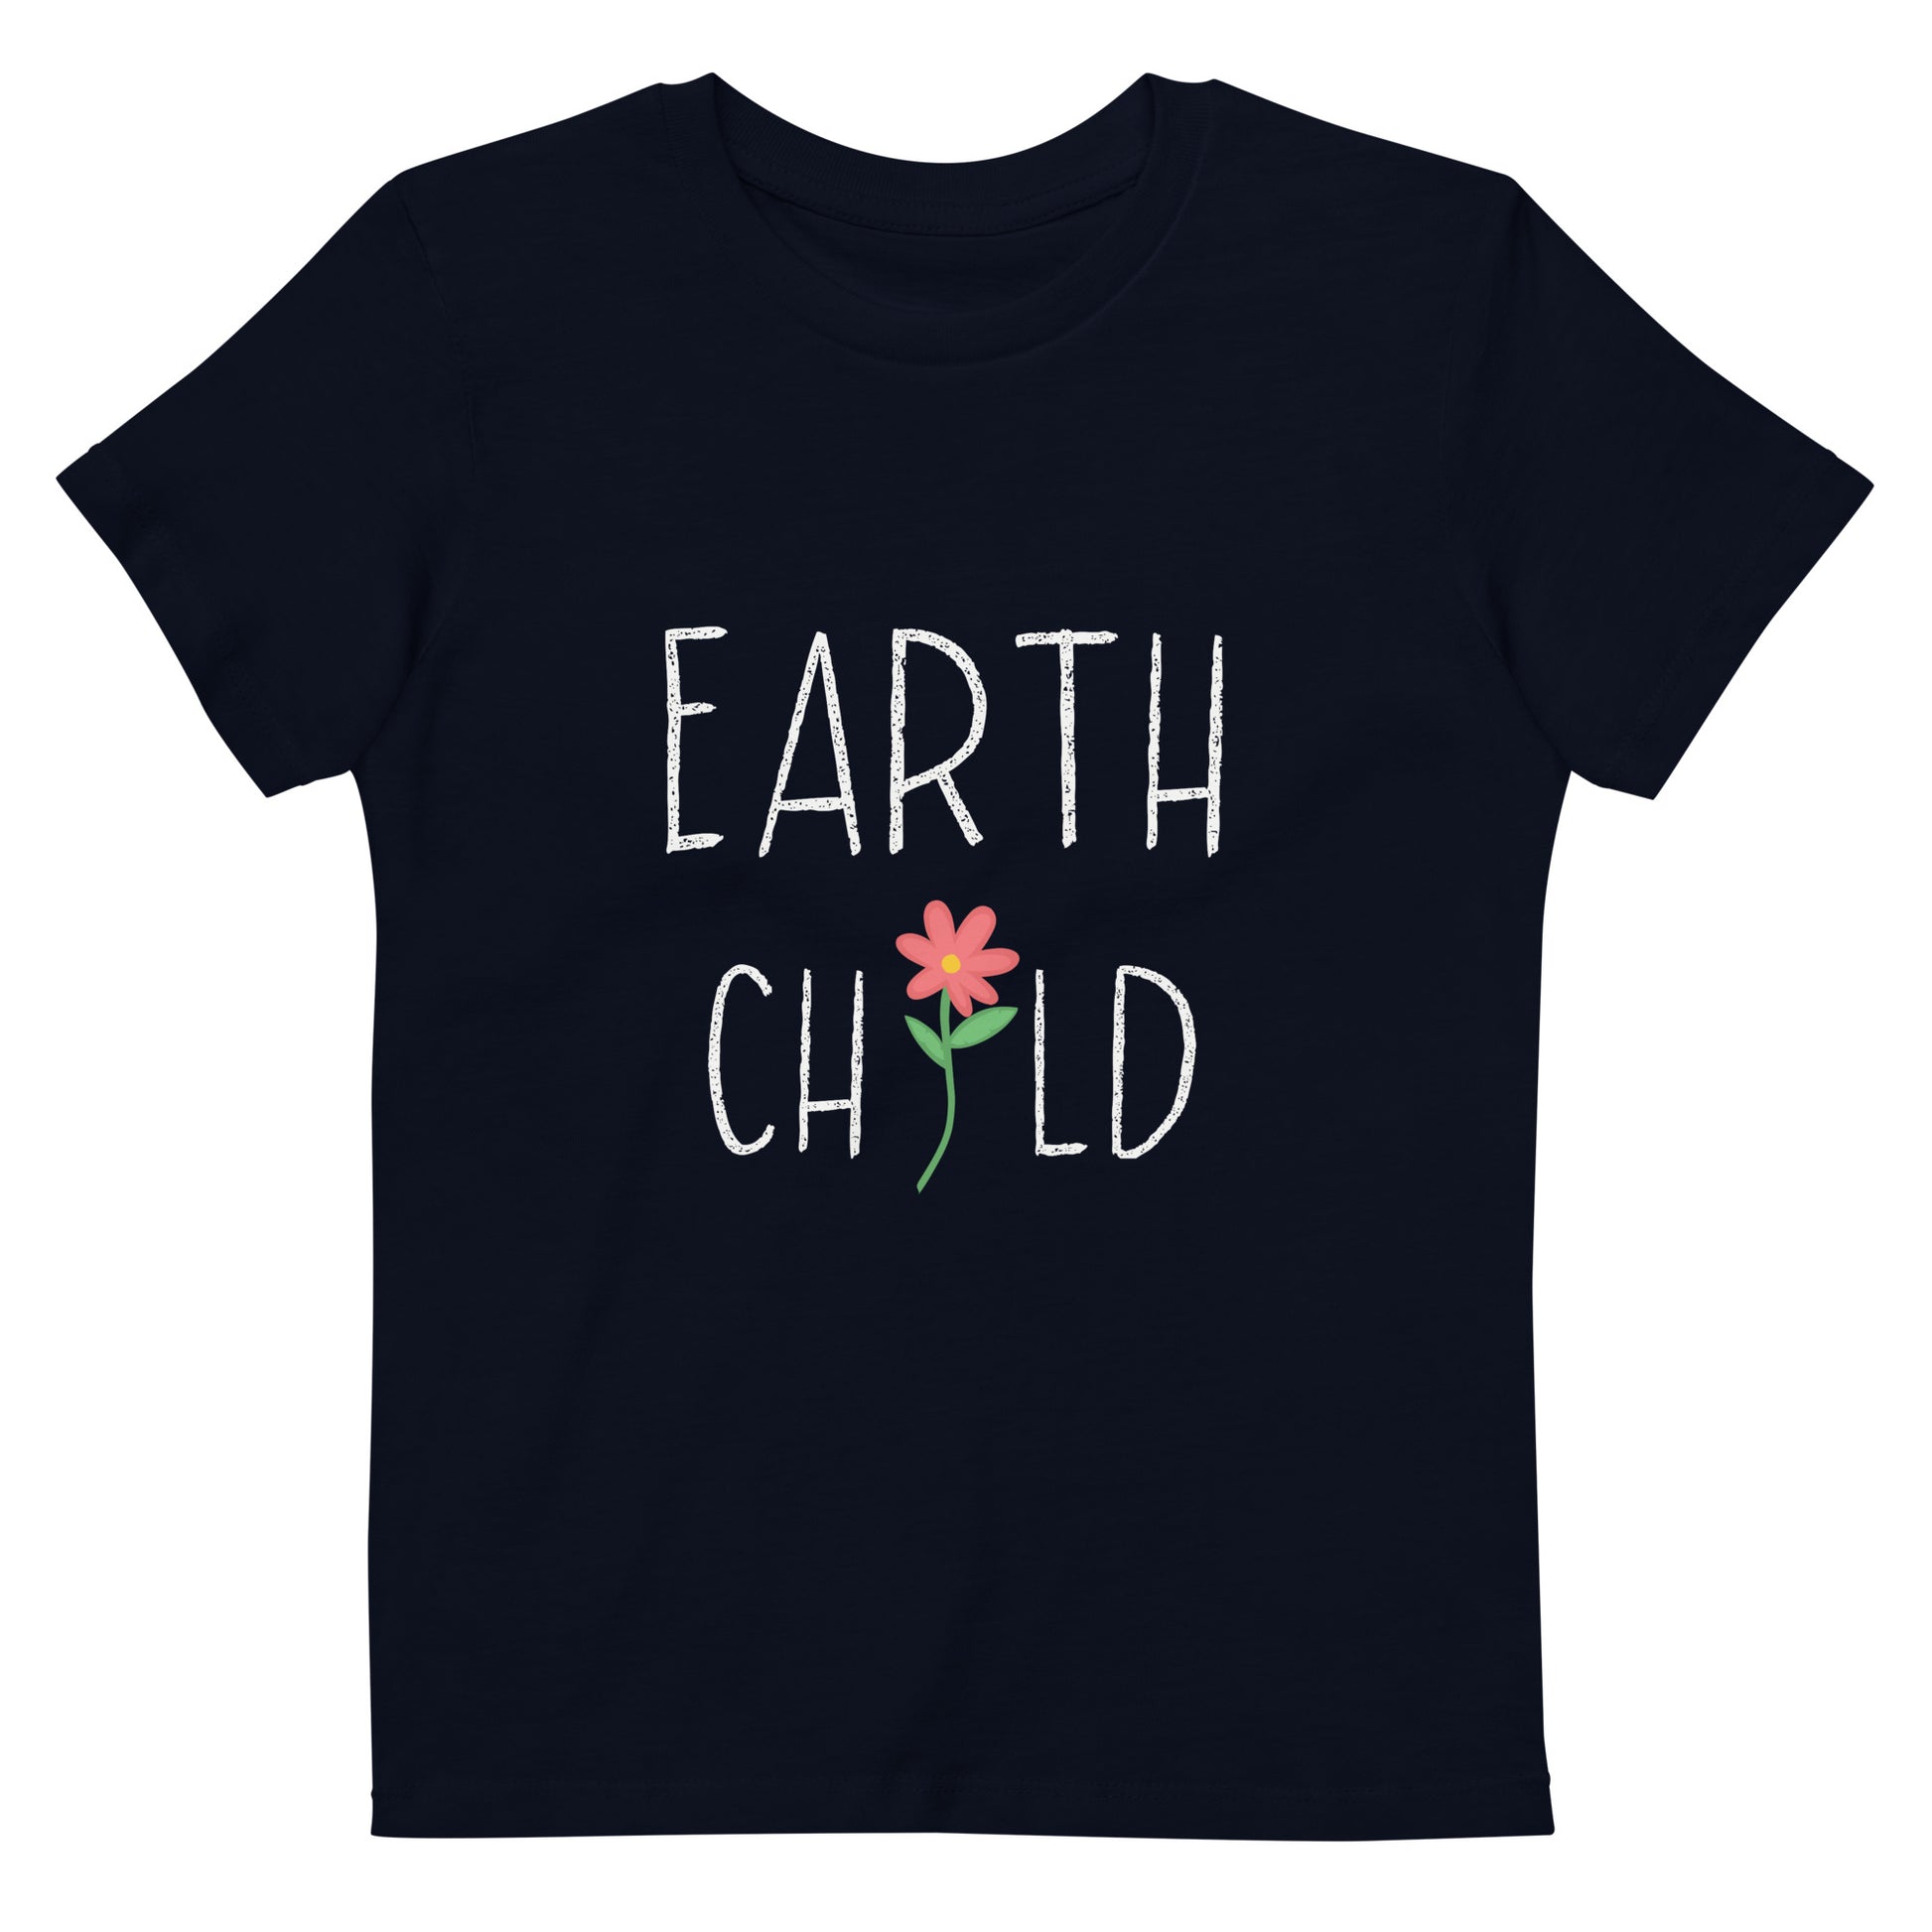 Kids Navy Organic T-Shirt - Earth Child, Front View Graphic with flower